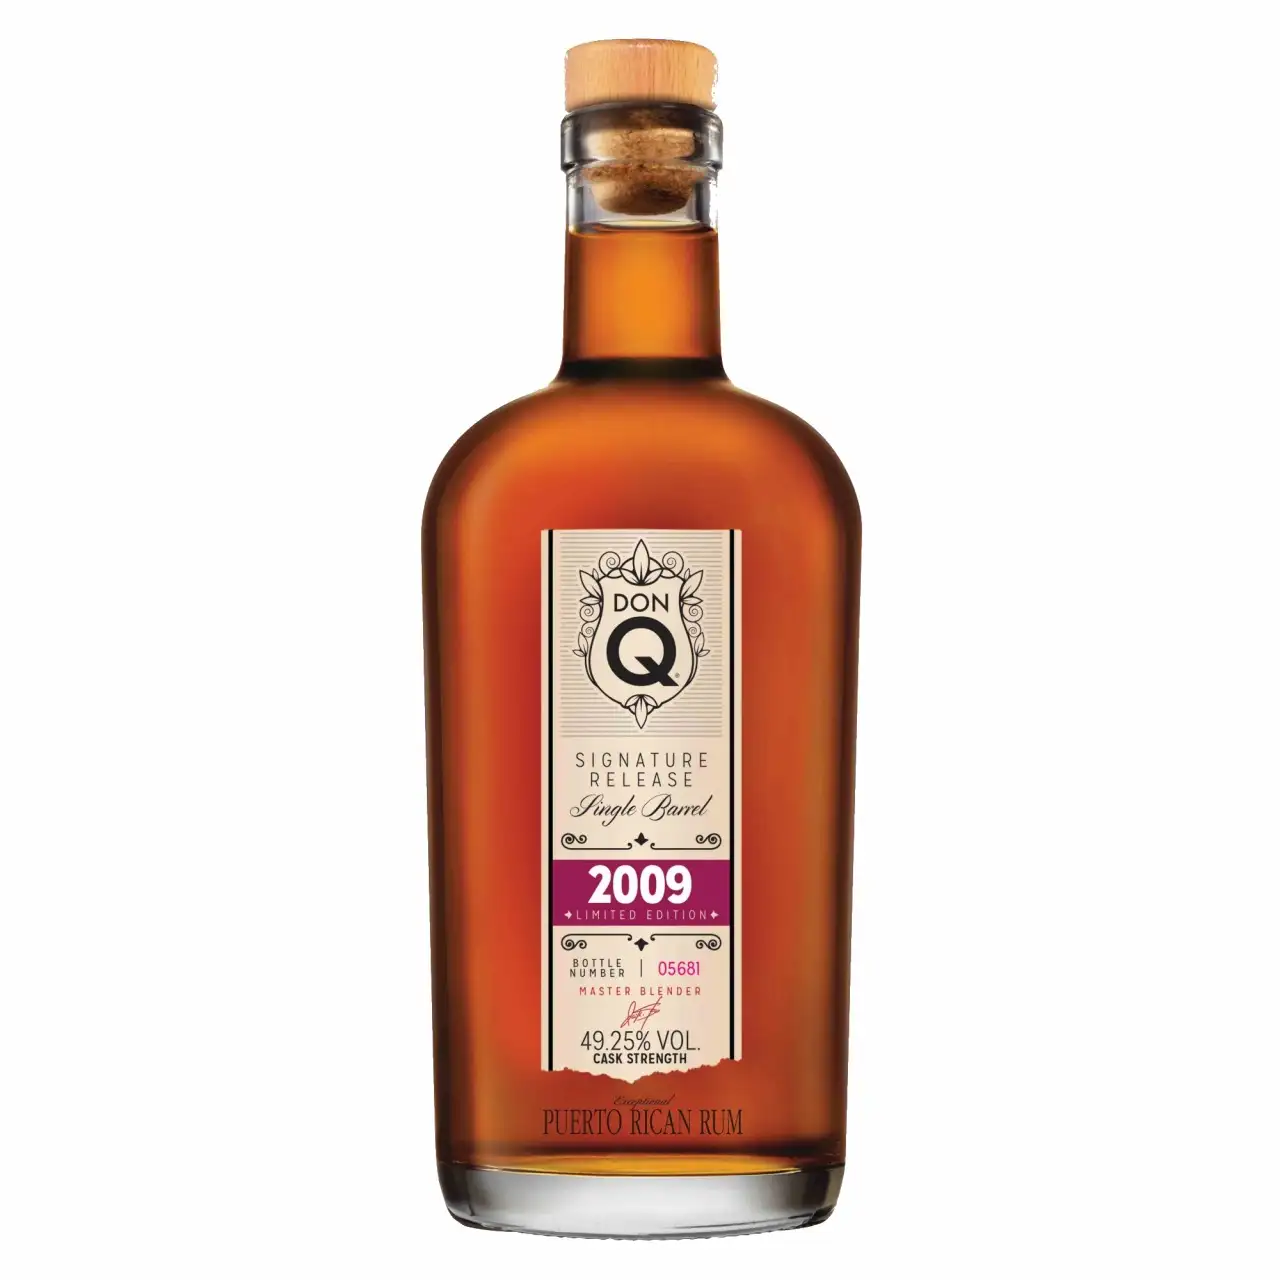 Image of the front of the bottle of the rum Don Q Single Barrel